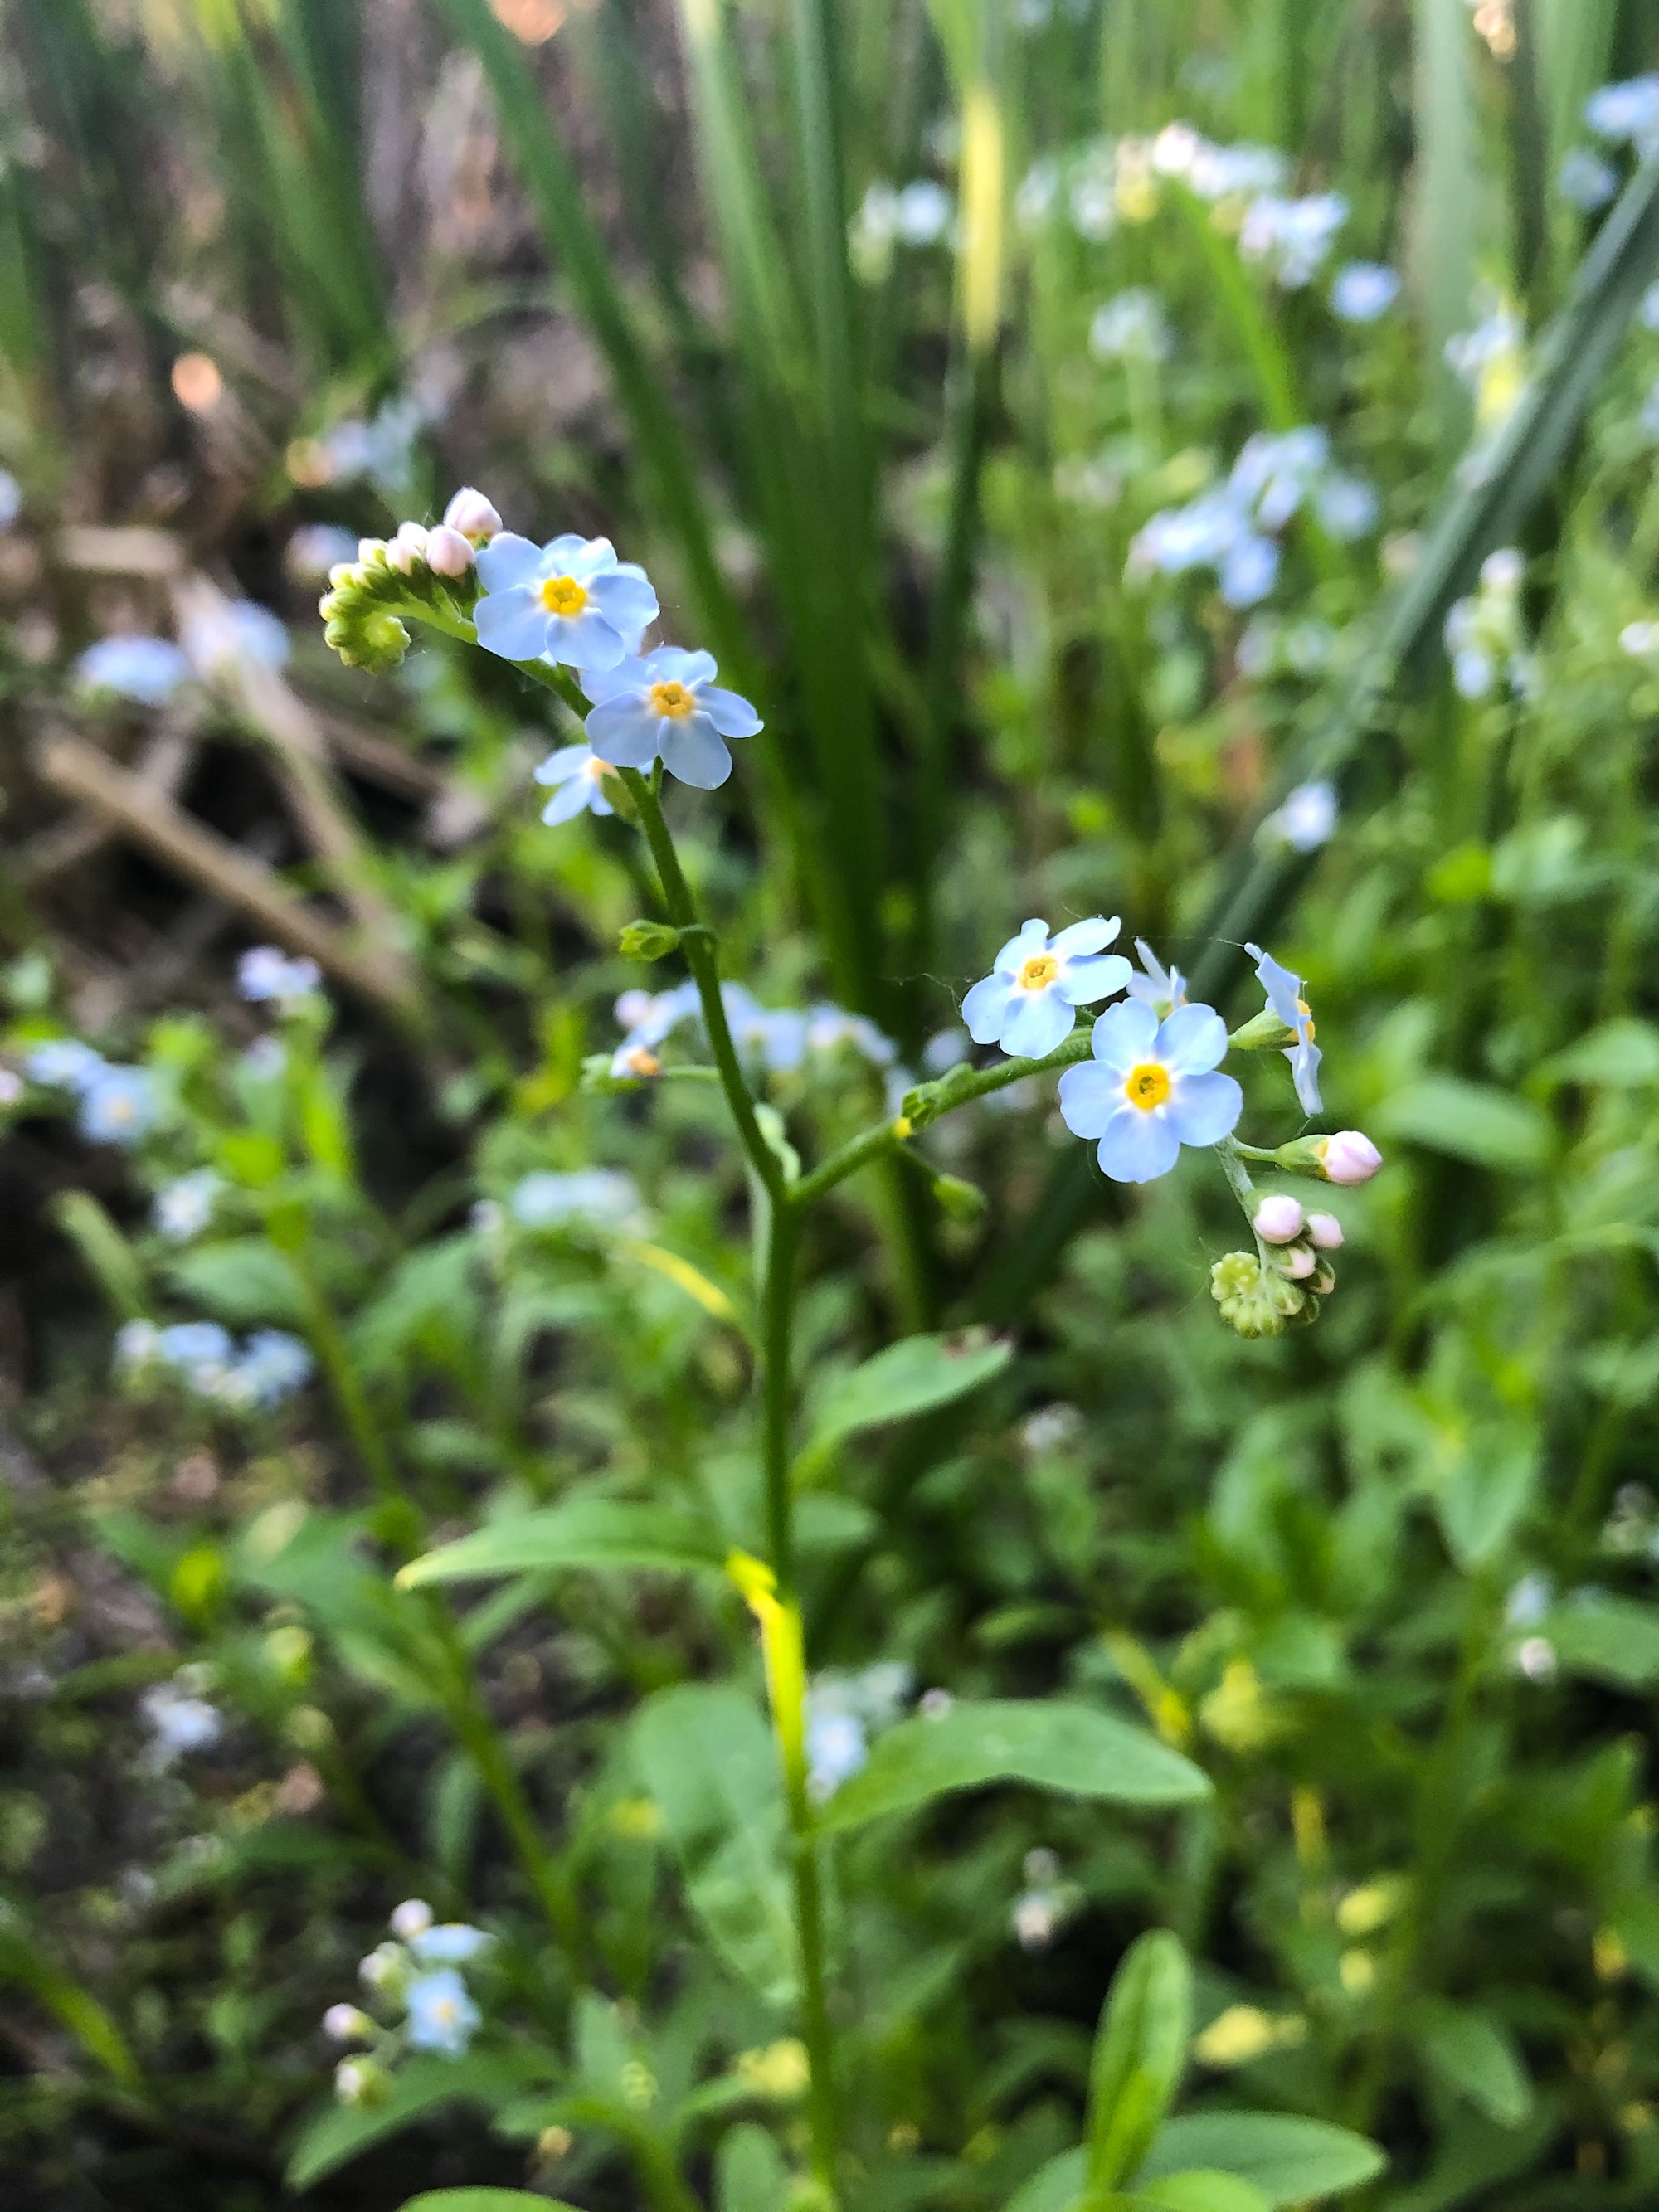 True Forget-me-not near cattails at Pickford Street stormwater outflow into Lake Wingra in Madison, Wisconsin on June 8, 2020.